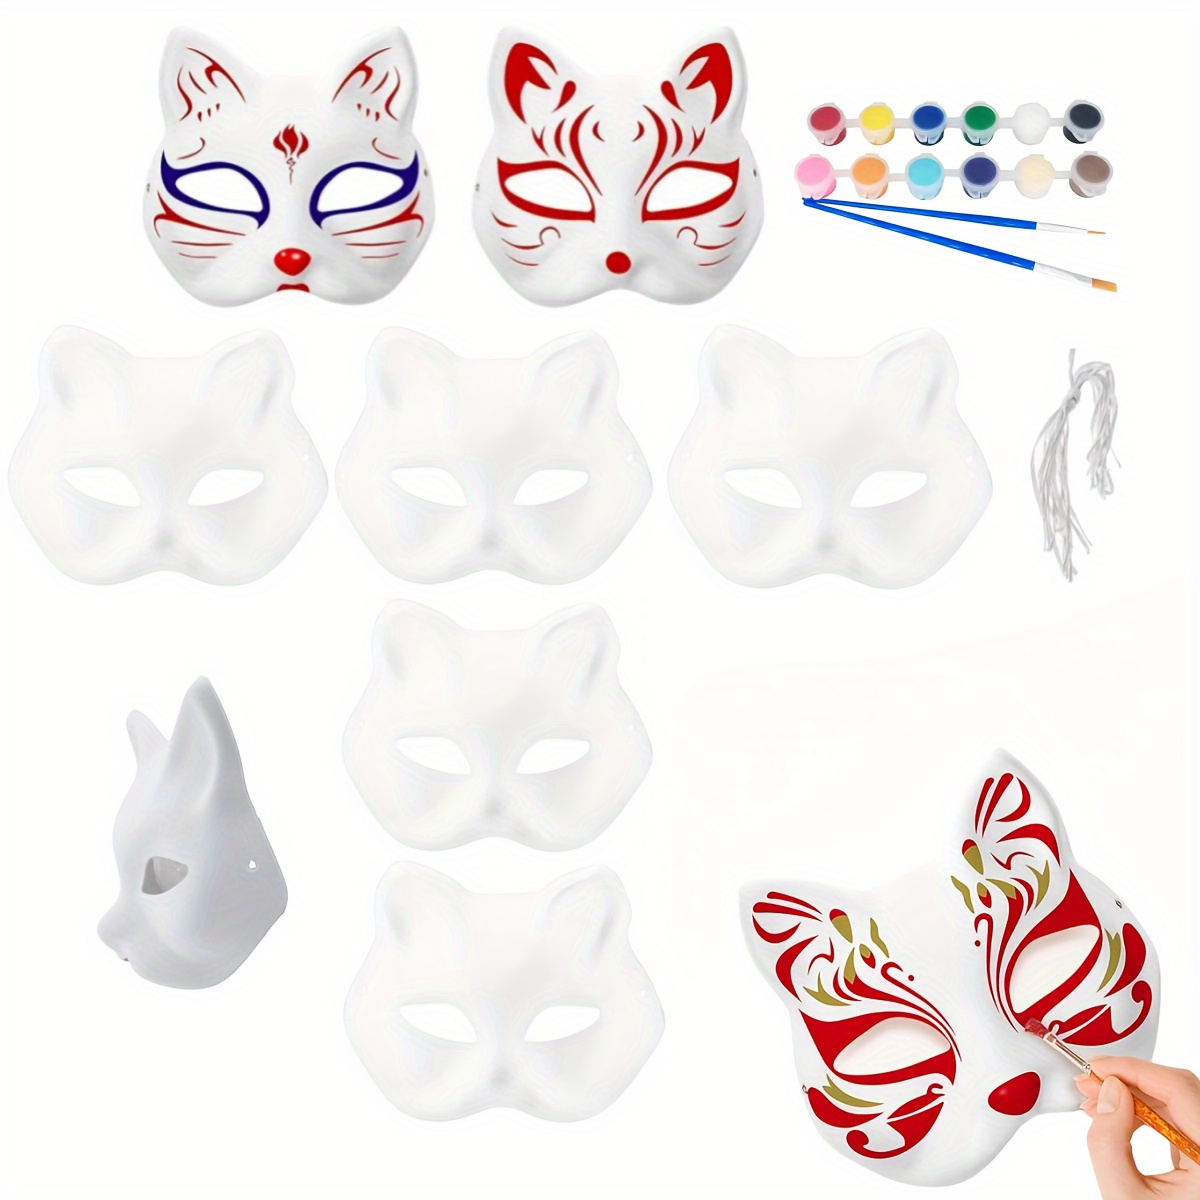 EXCEART 15pcs Pulp Blank Mask Paintable Mask Performance Prop Purge  Halloween Plain Masquerade Mask Paper Masks for Crafts Paintable Cat Mask  Cat Mask